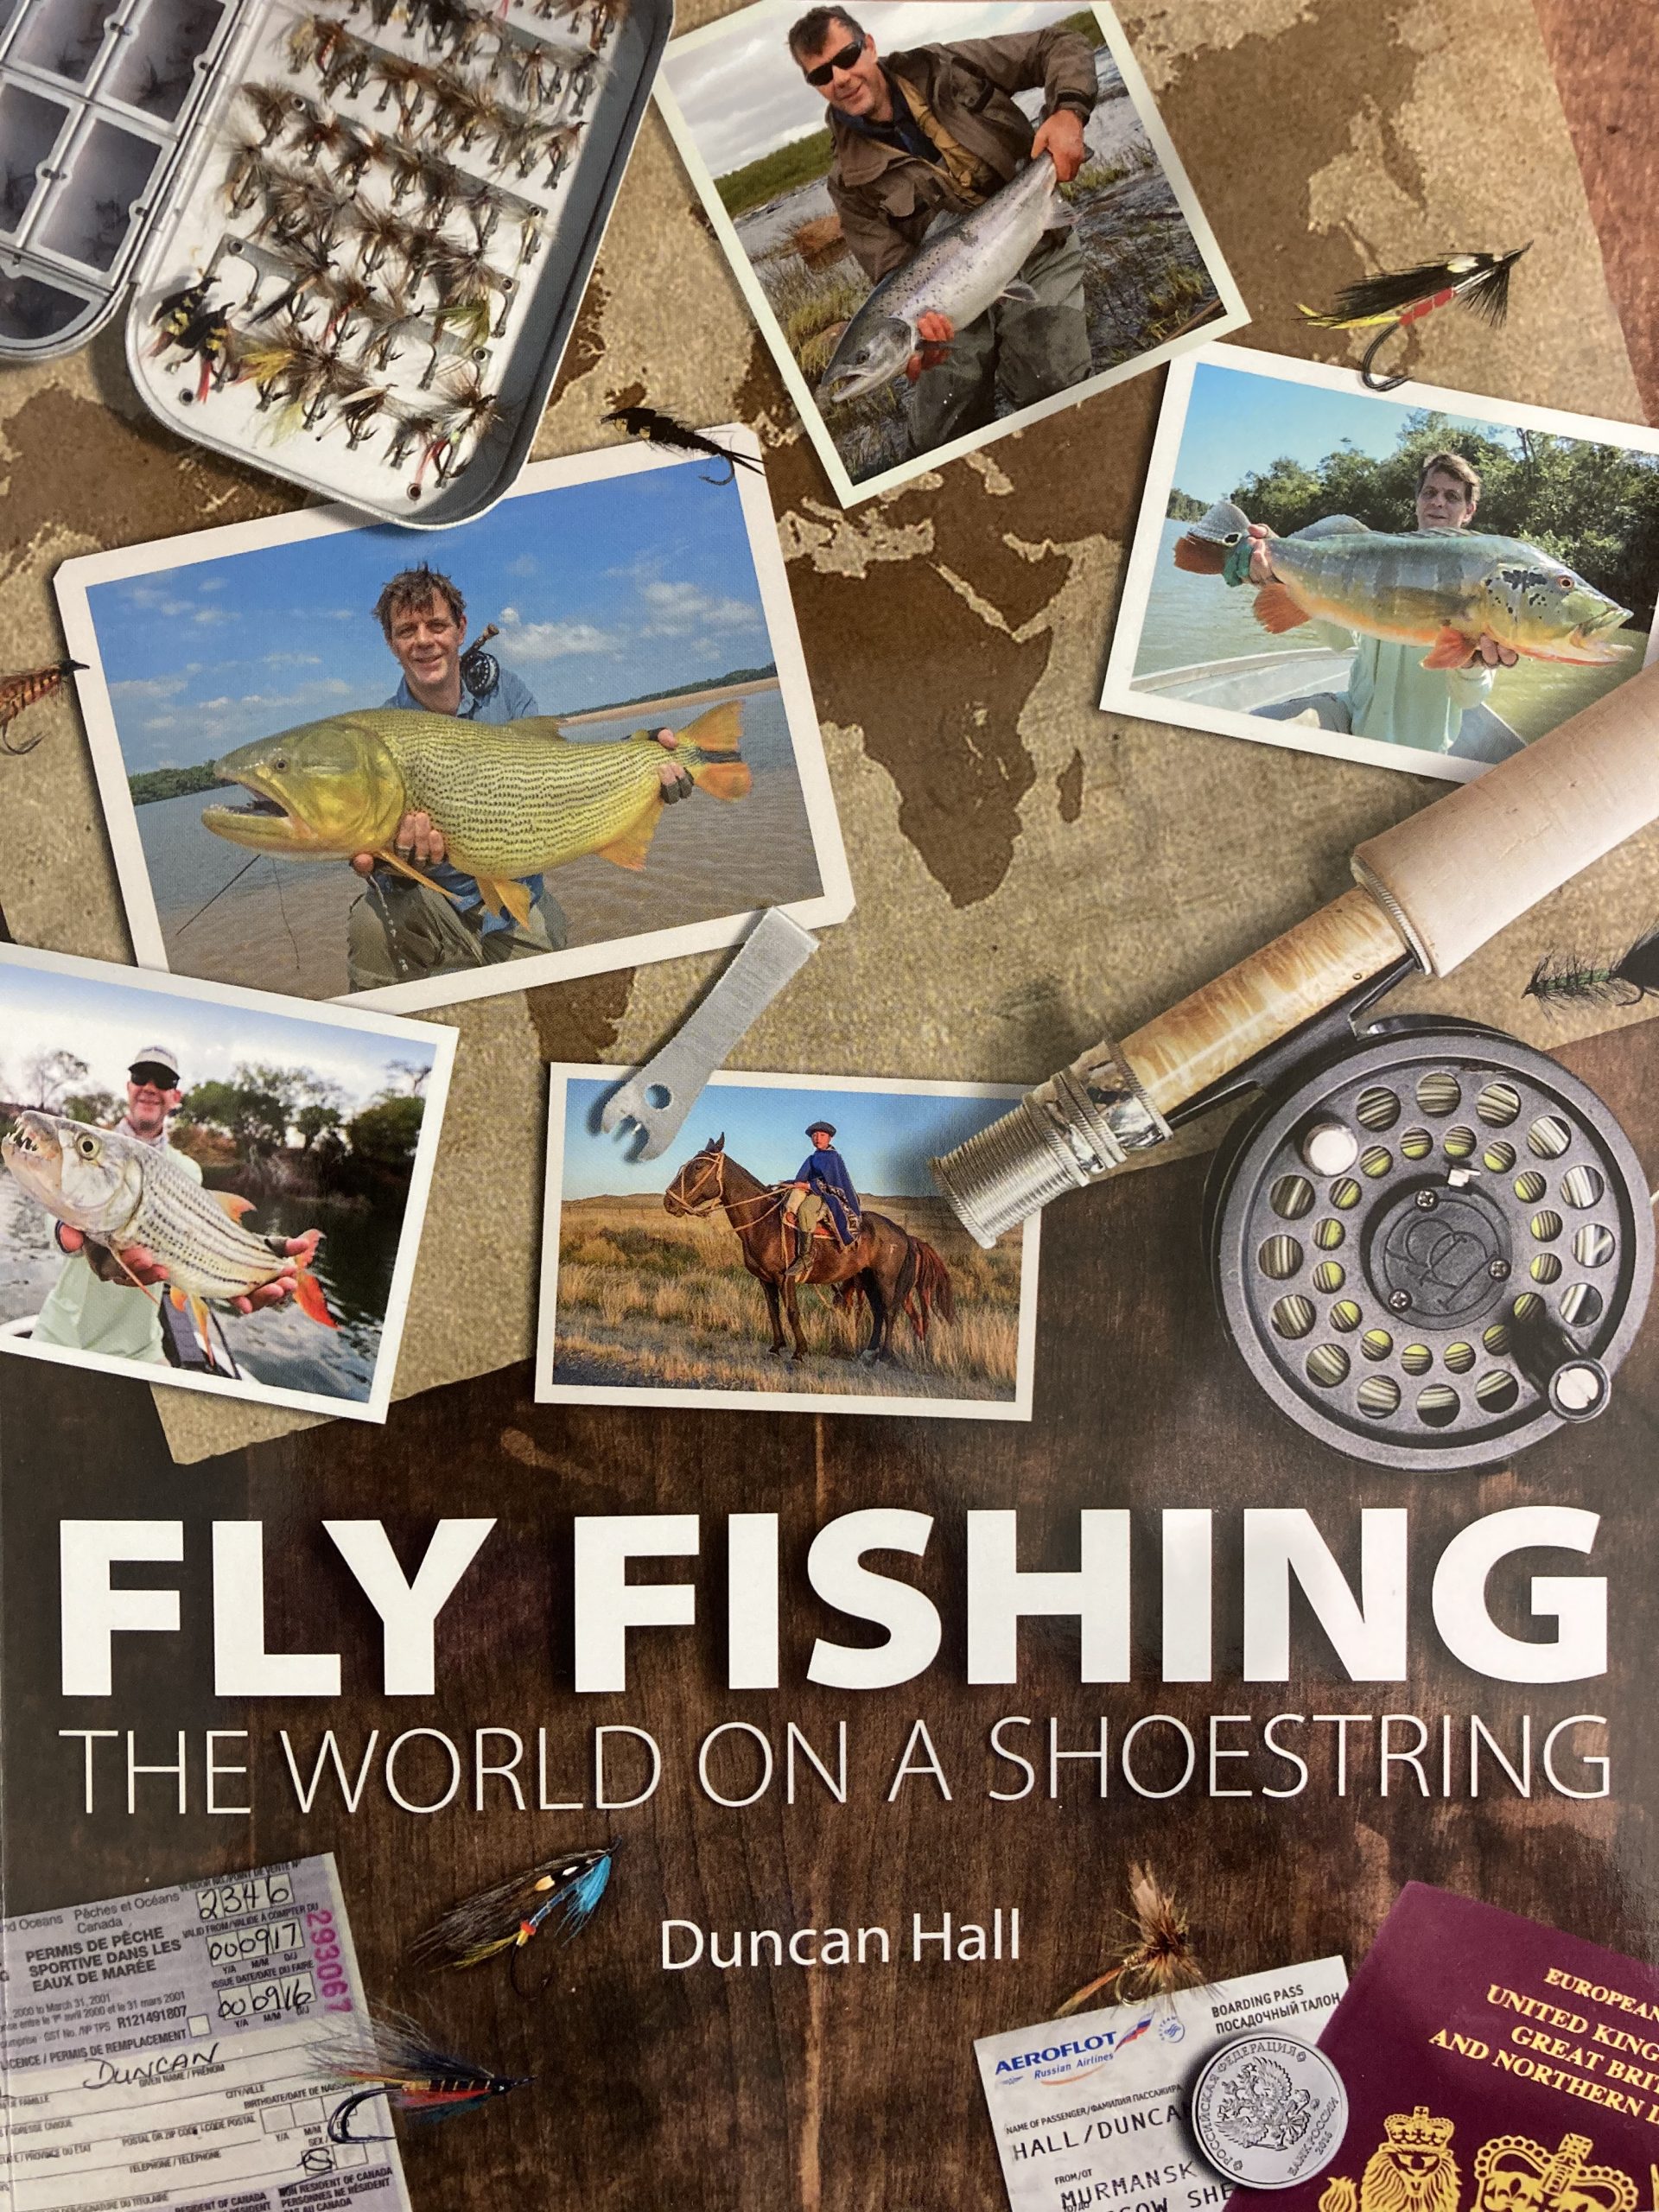 Duncan Hall's wonderful book about fly fishing around the globe